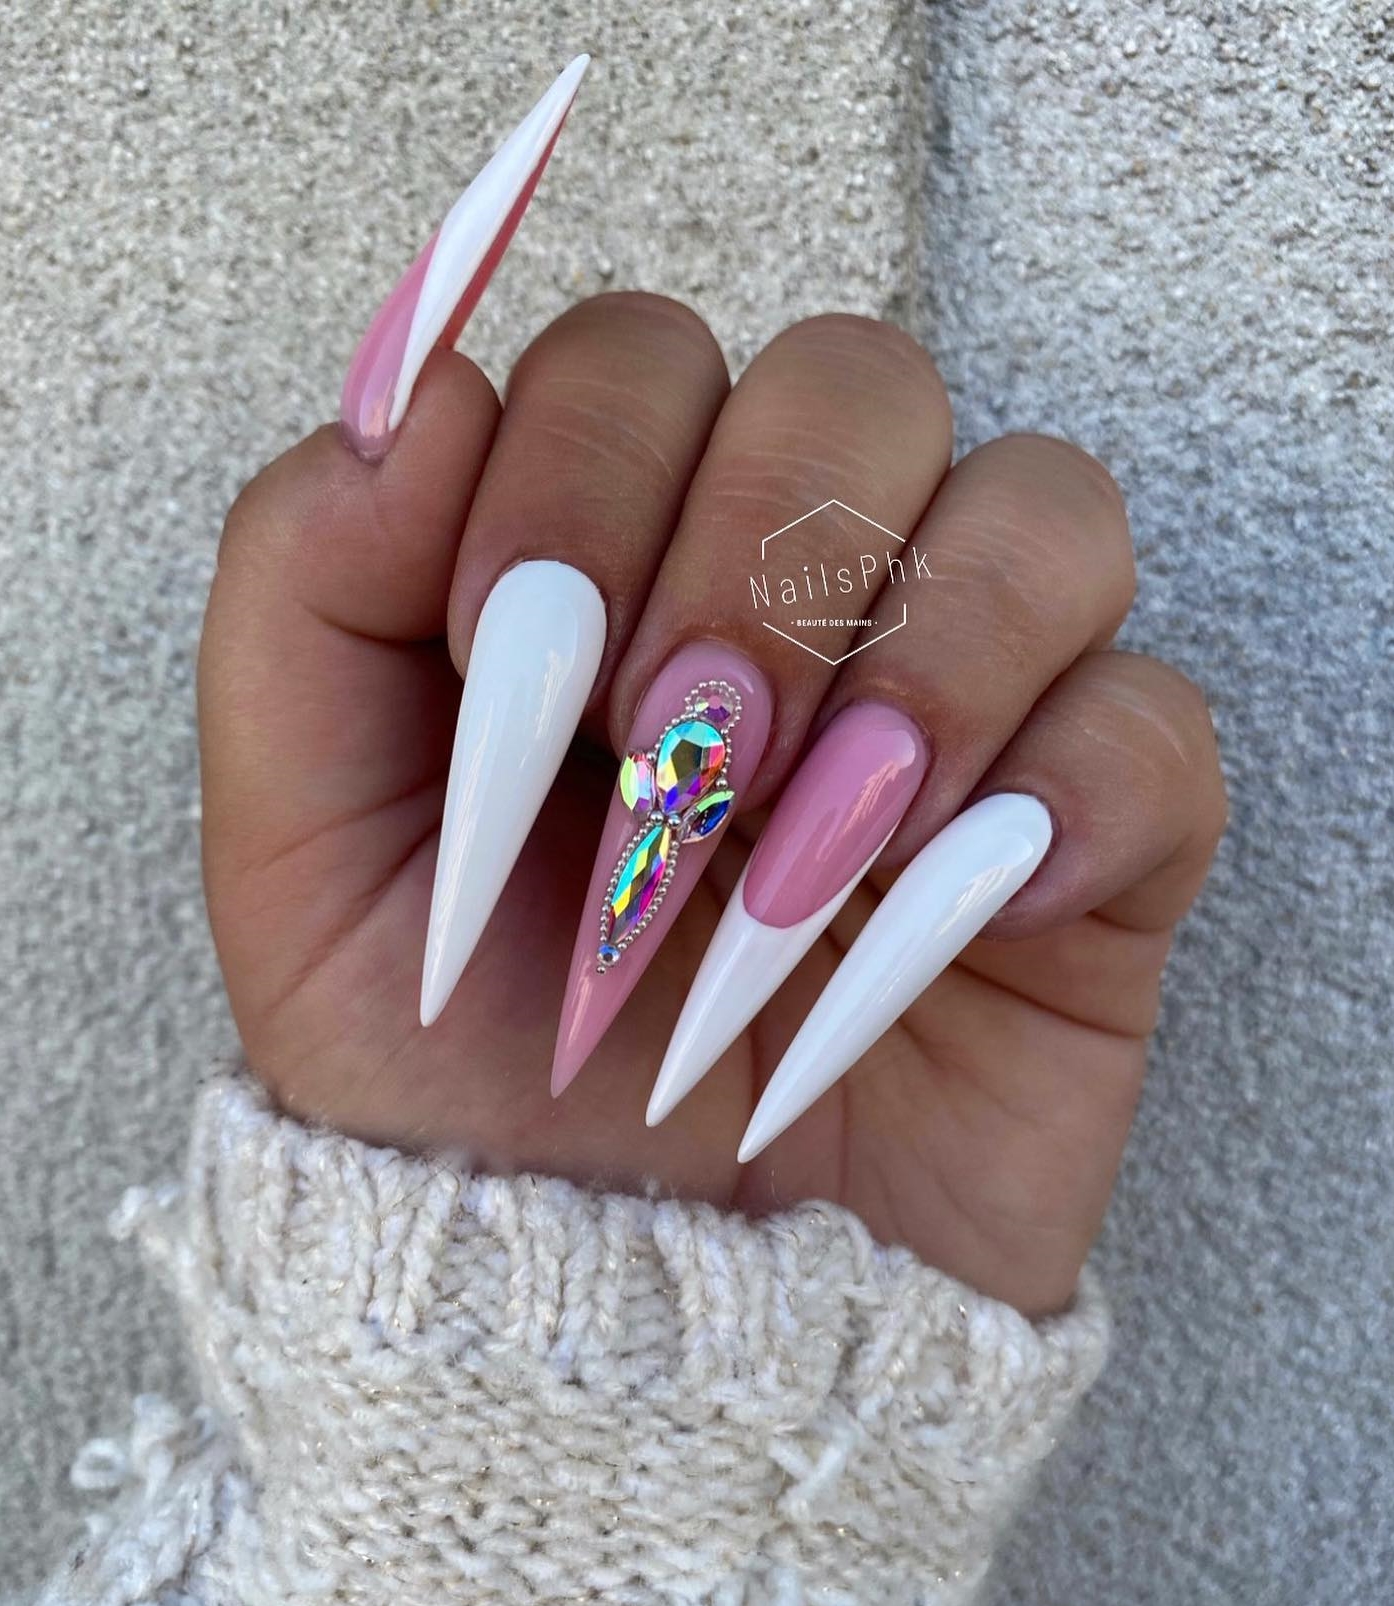 white pointed acrylic nails